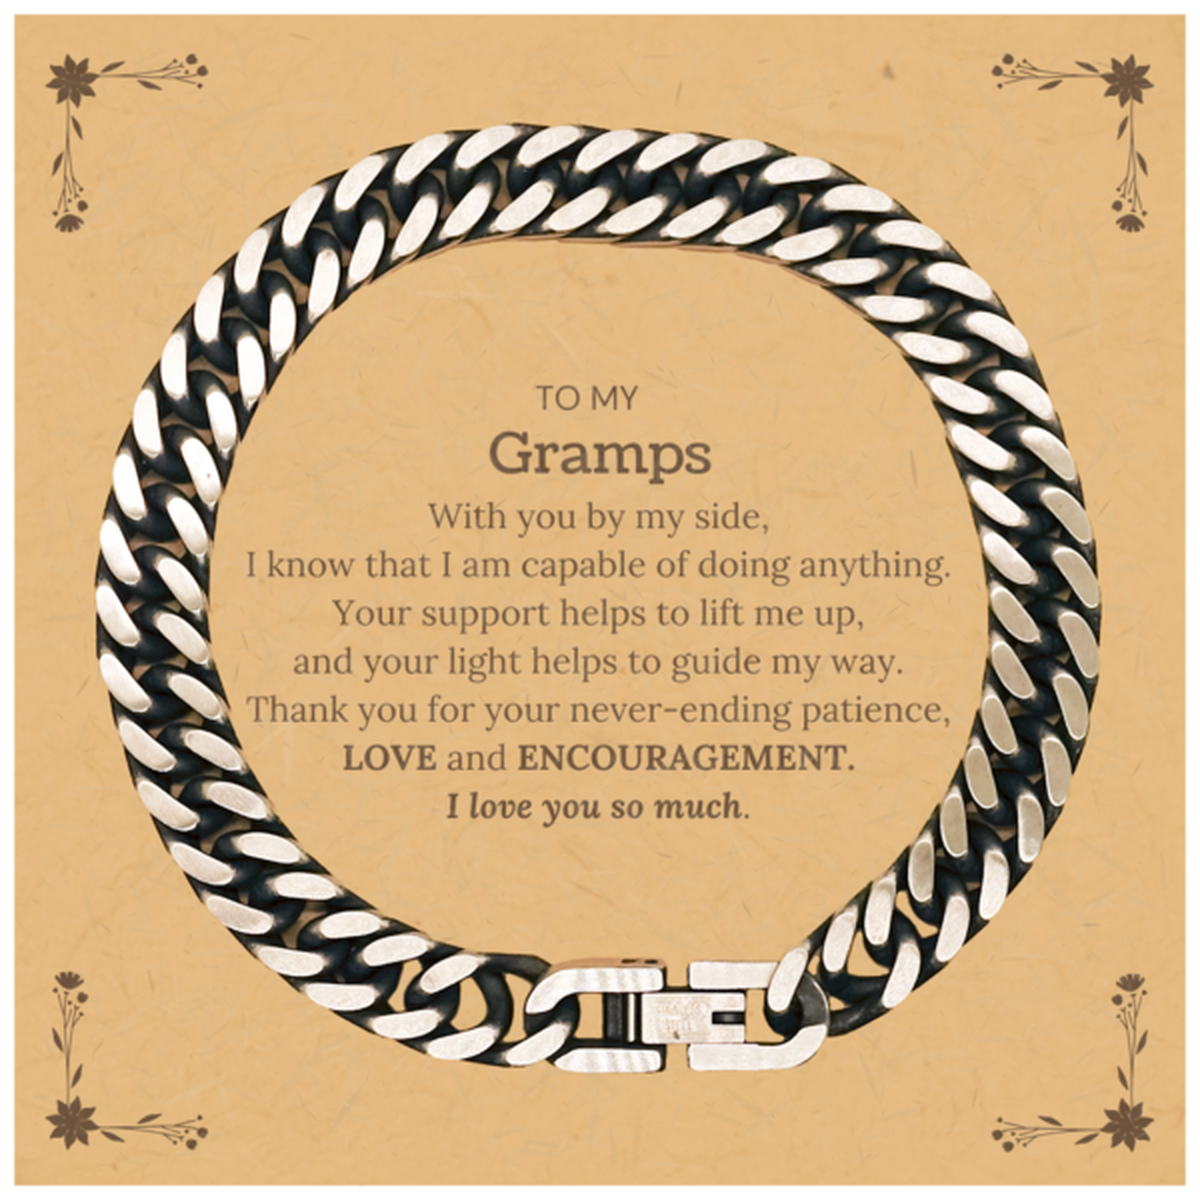 Appreciation Gramps Cuban Link Chain Bracelet Gifts, To My Gramps Birthday Christmas Wedding Keepsake Gifts for Gramps With you by my side, I know that I am capable of doing anything. I love you so much